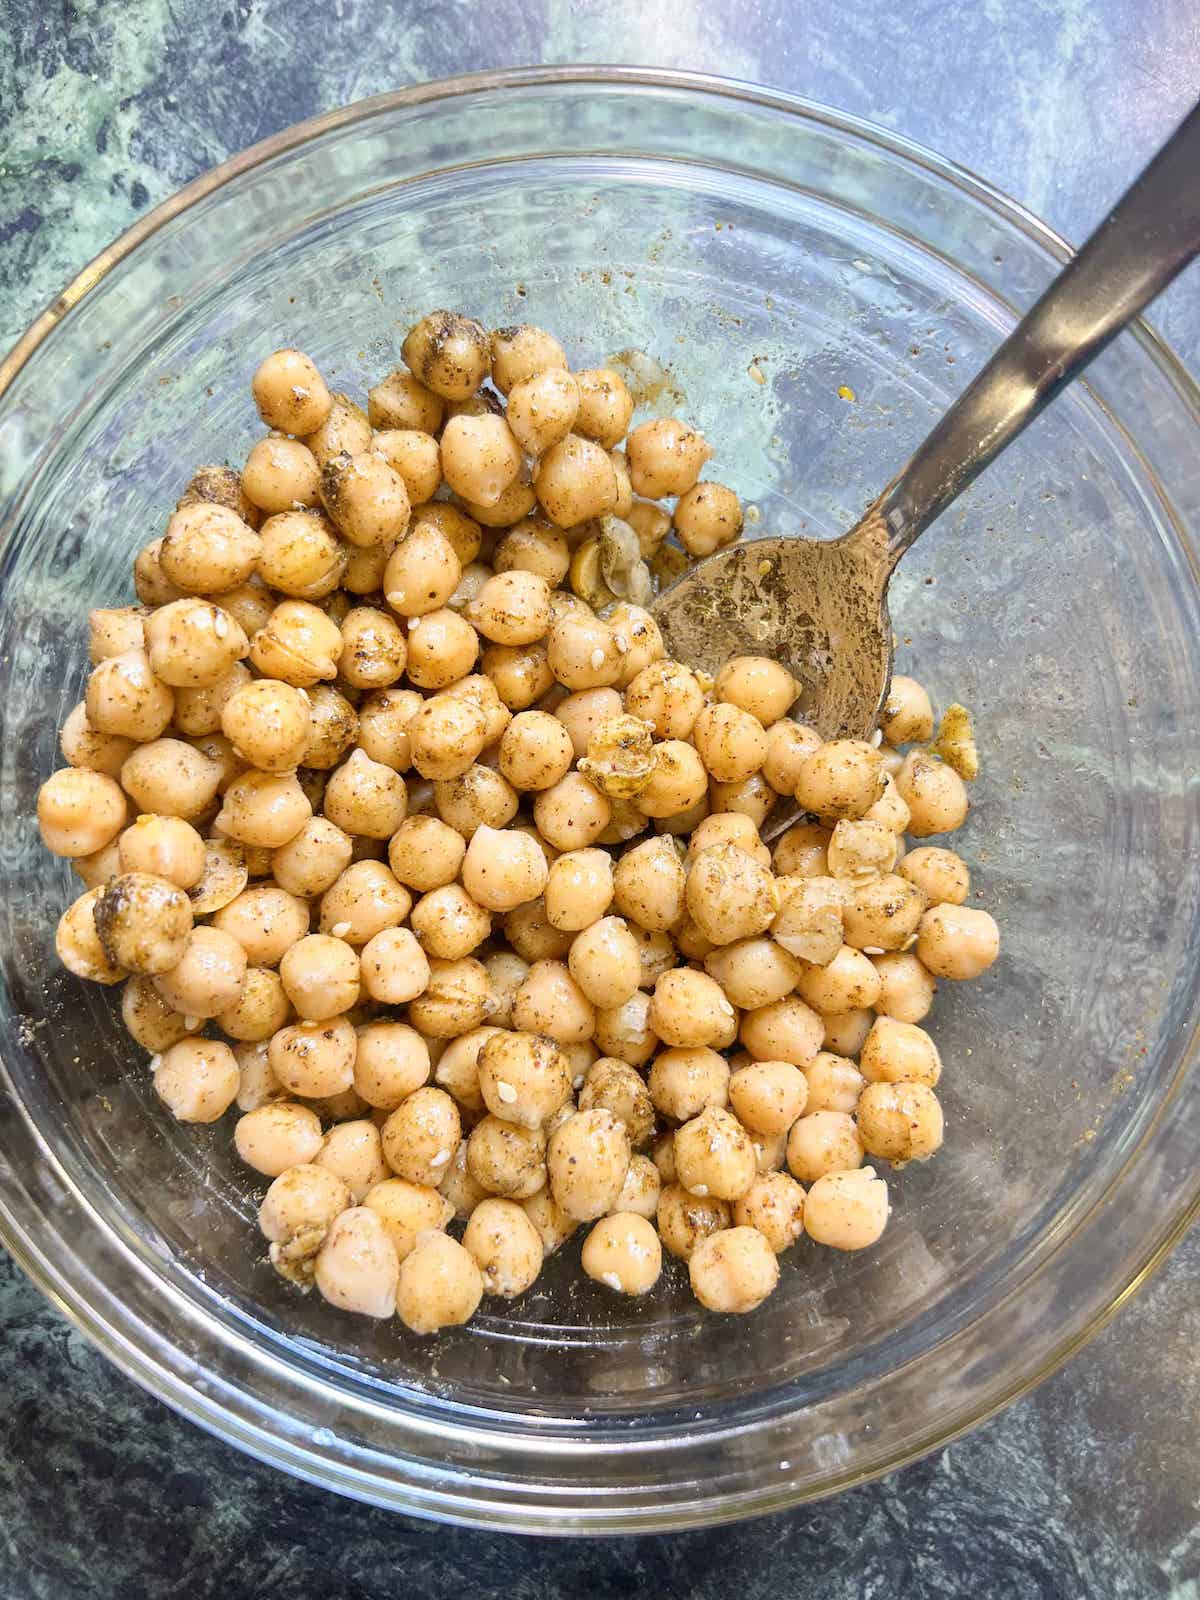 Chickpeas tossed with za'atar spice in a glass bowl with a spoon.